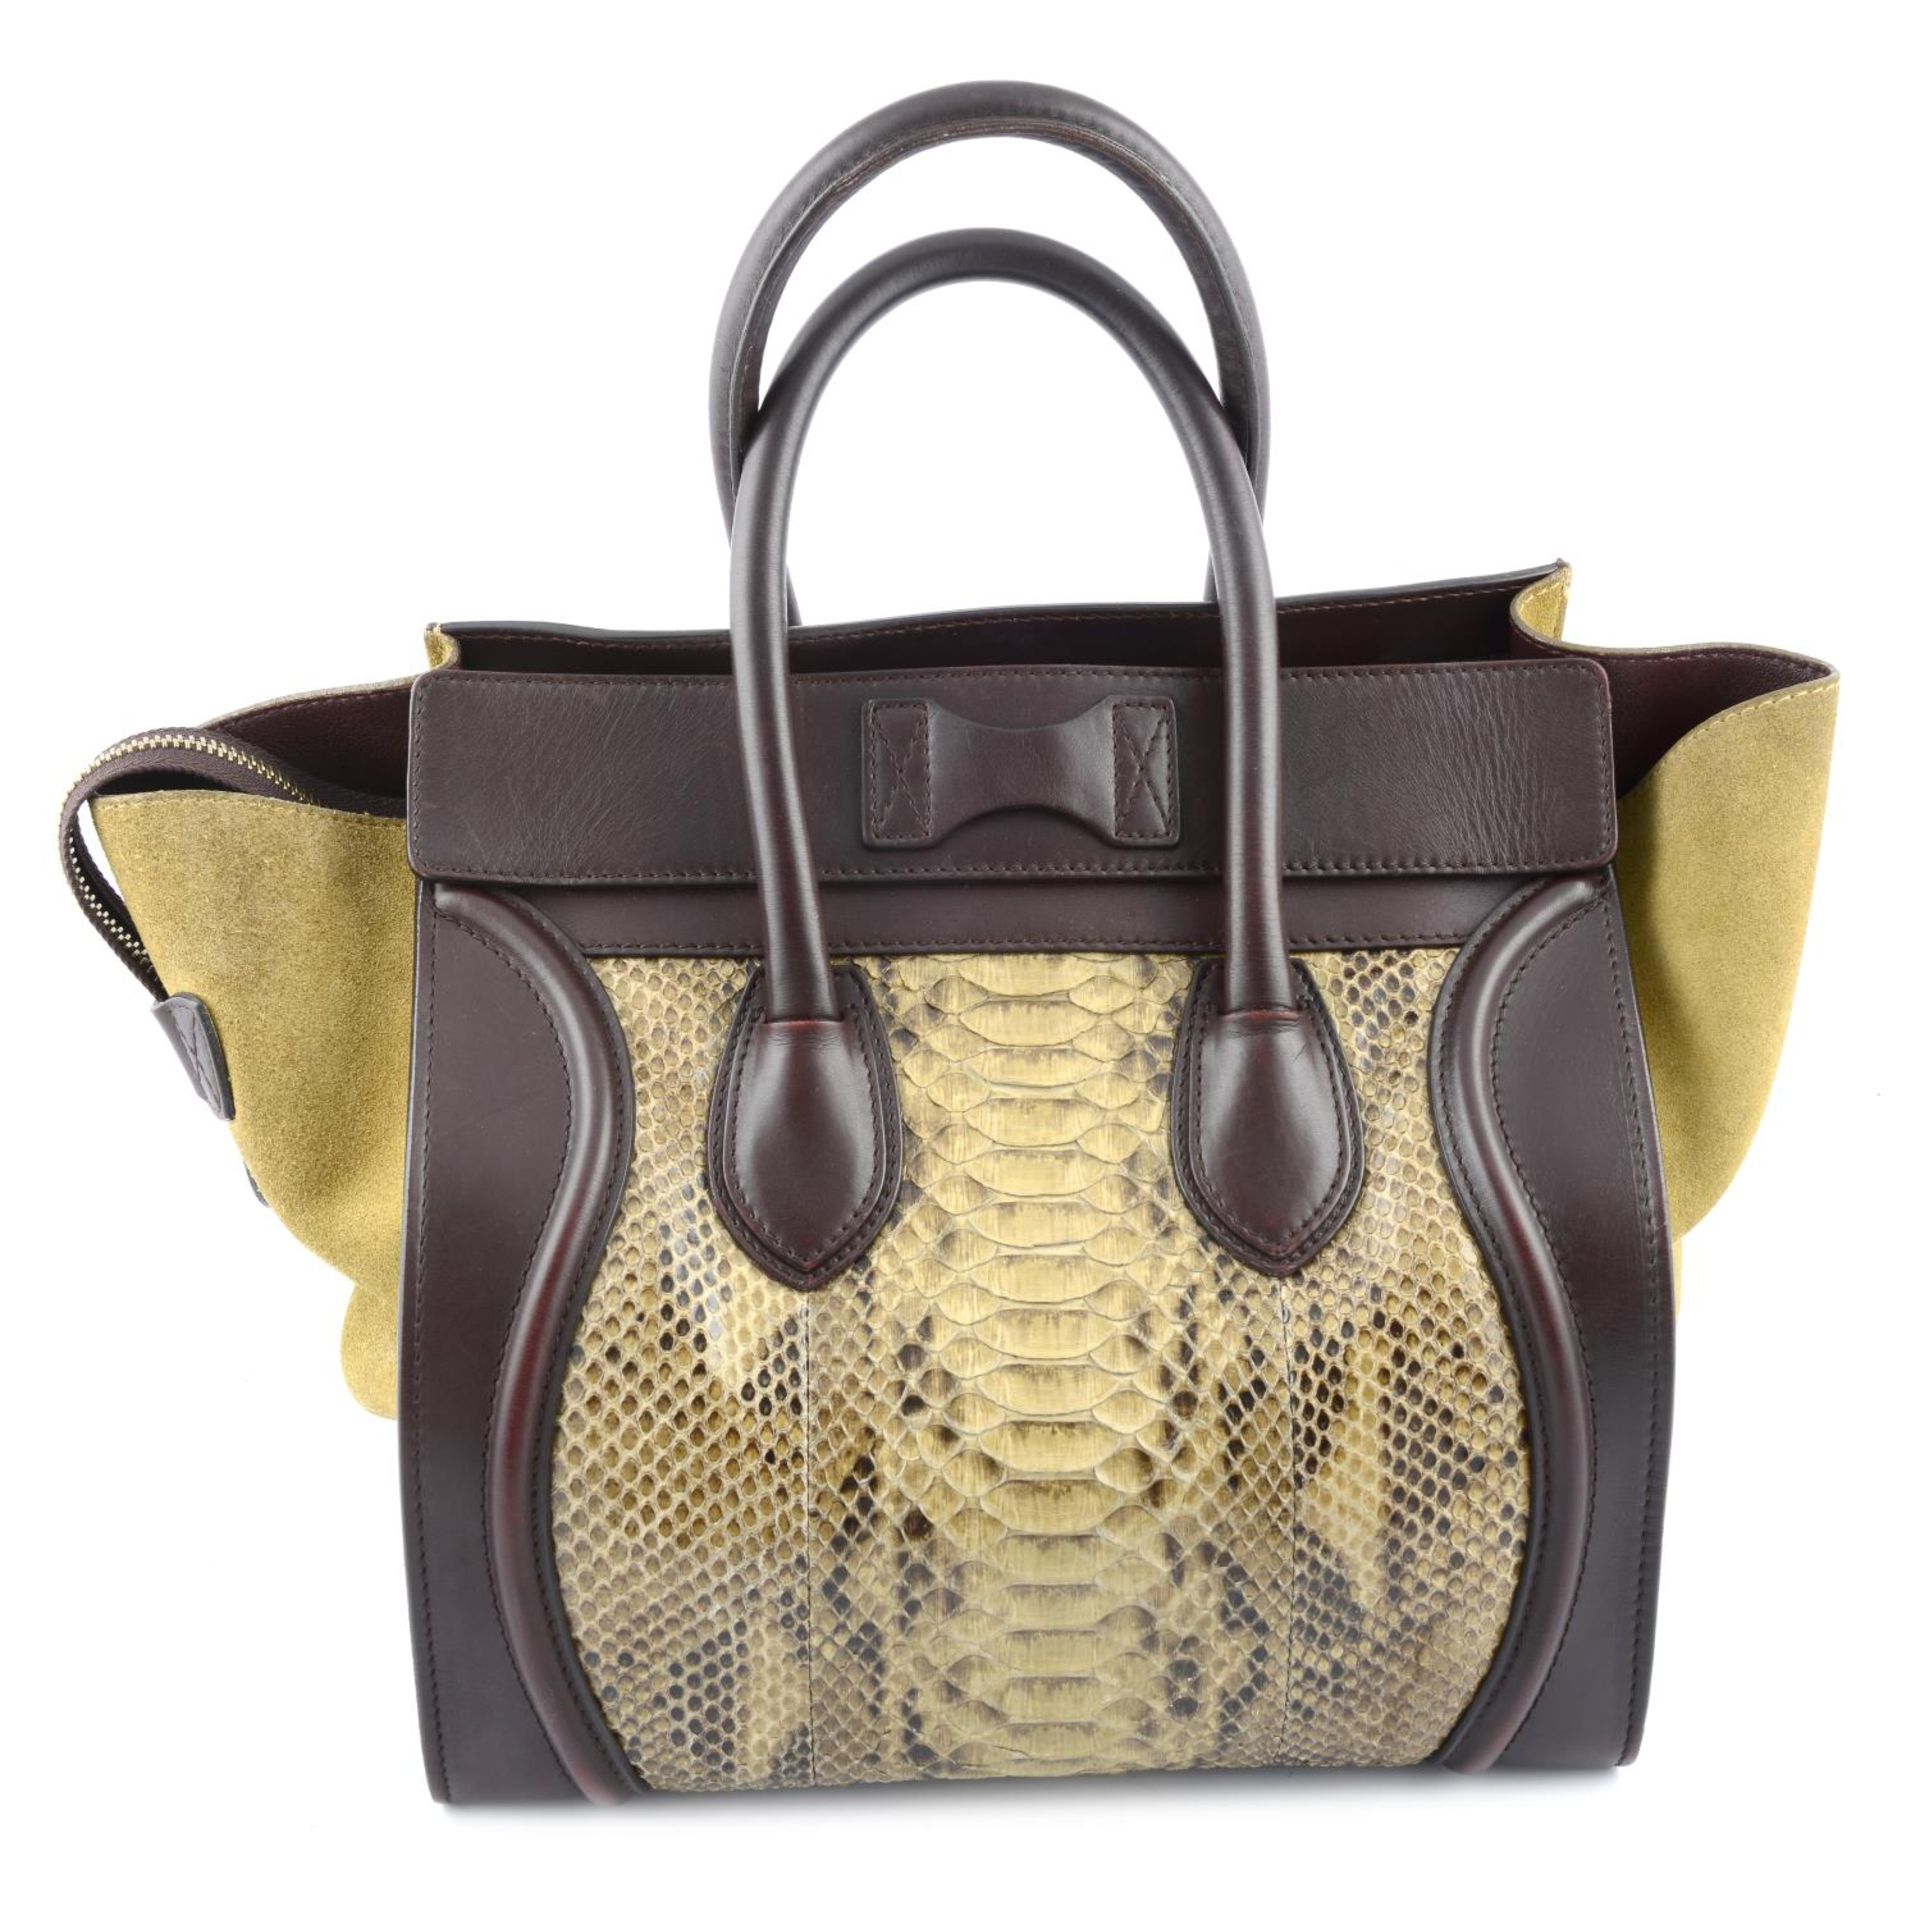 CÉLINE - a limited edition Mini Luggage Tote. - Image 2 of 4